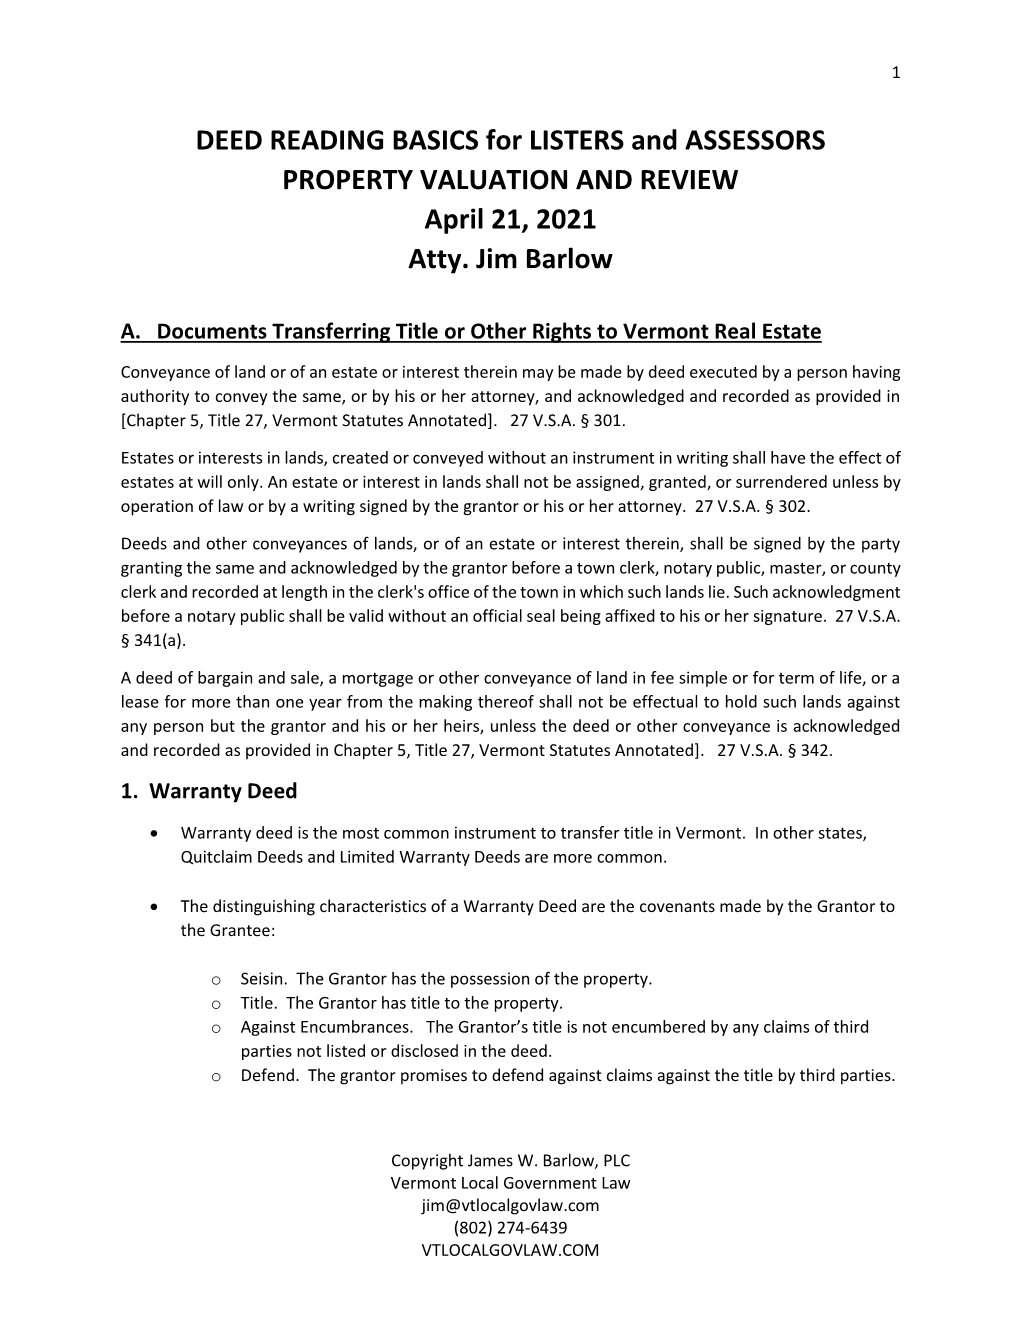 PVR Deed Reading and Exemptions 2021.Pdf